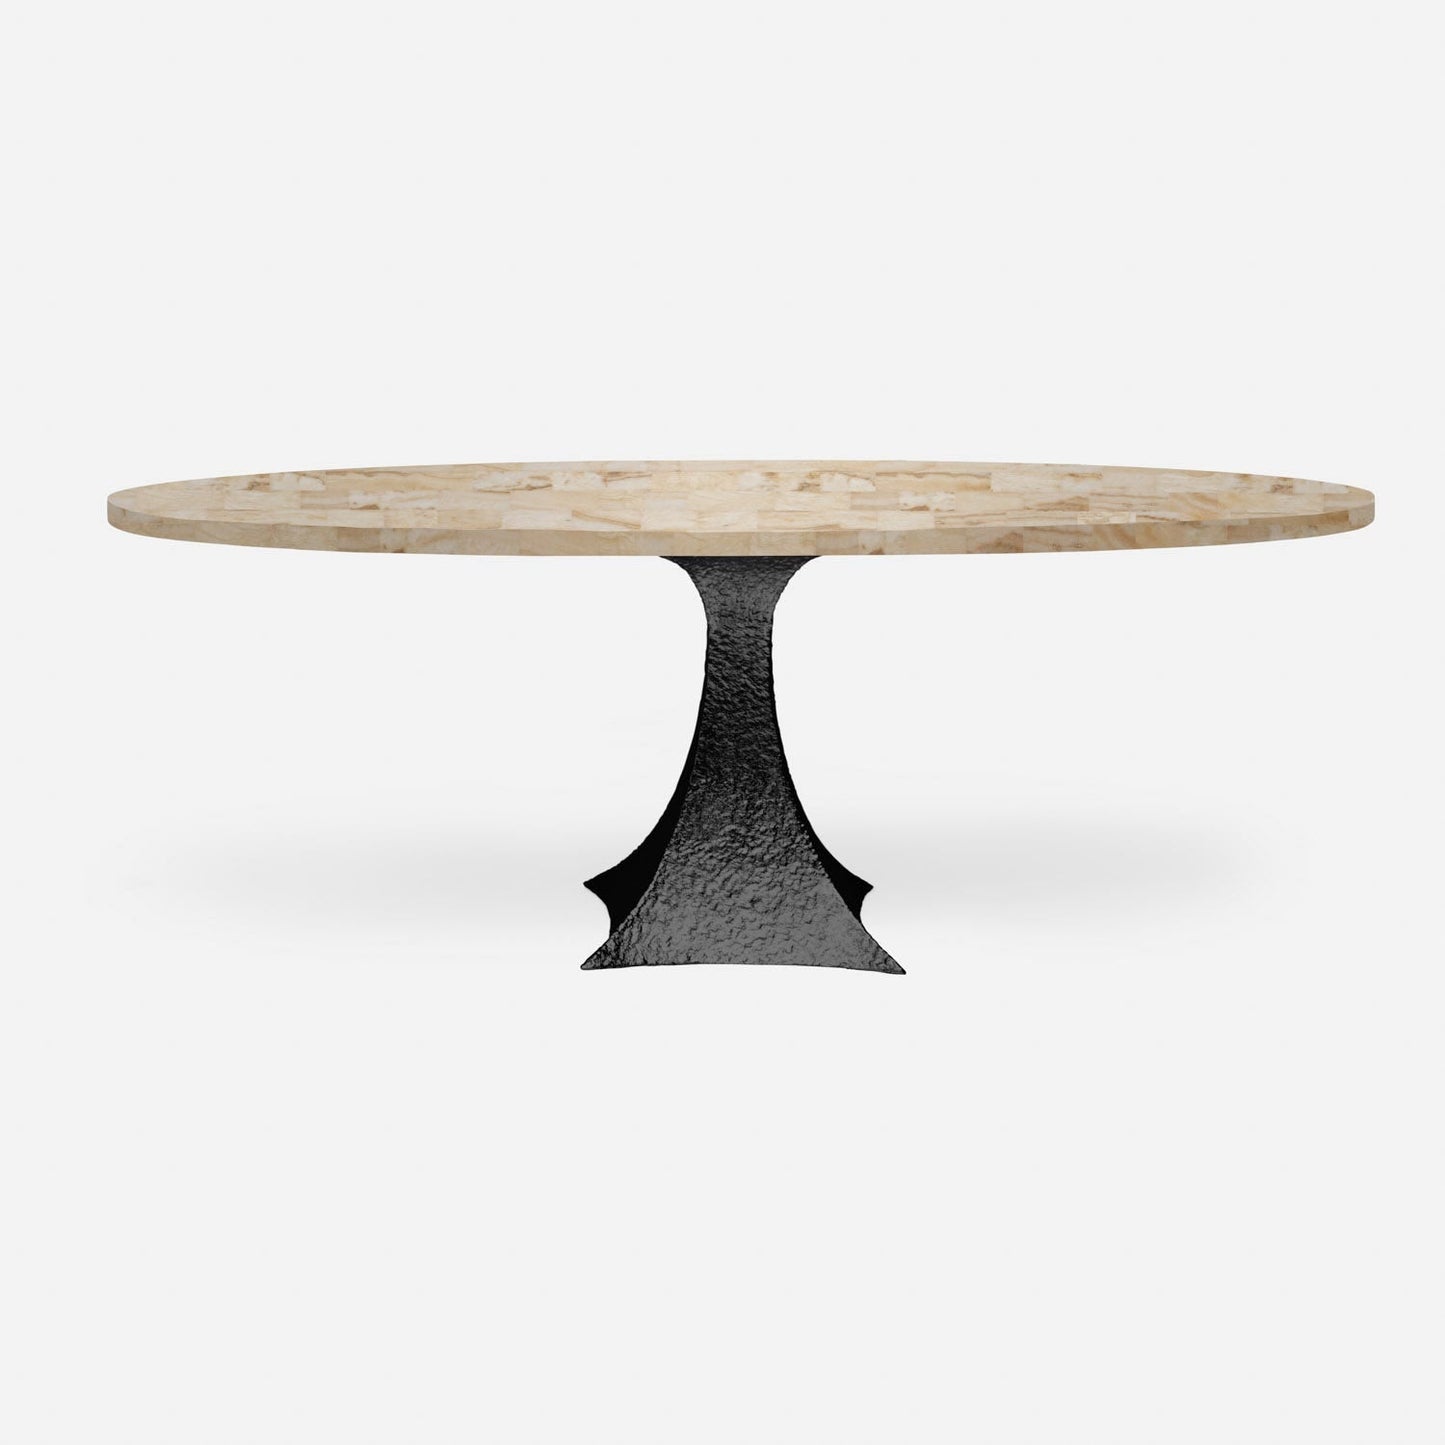 Made Goods Noor 72" x 42" x 30" Single Base Bumpy Black Iron Dinning Table With Oval Beige Crystal Stone Table Top